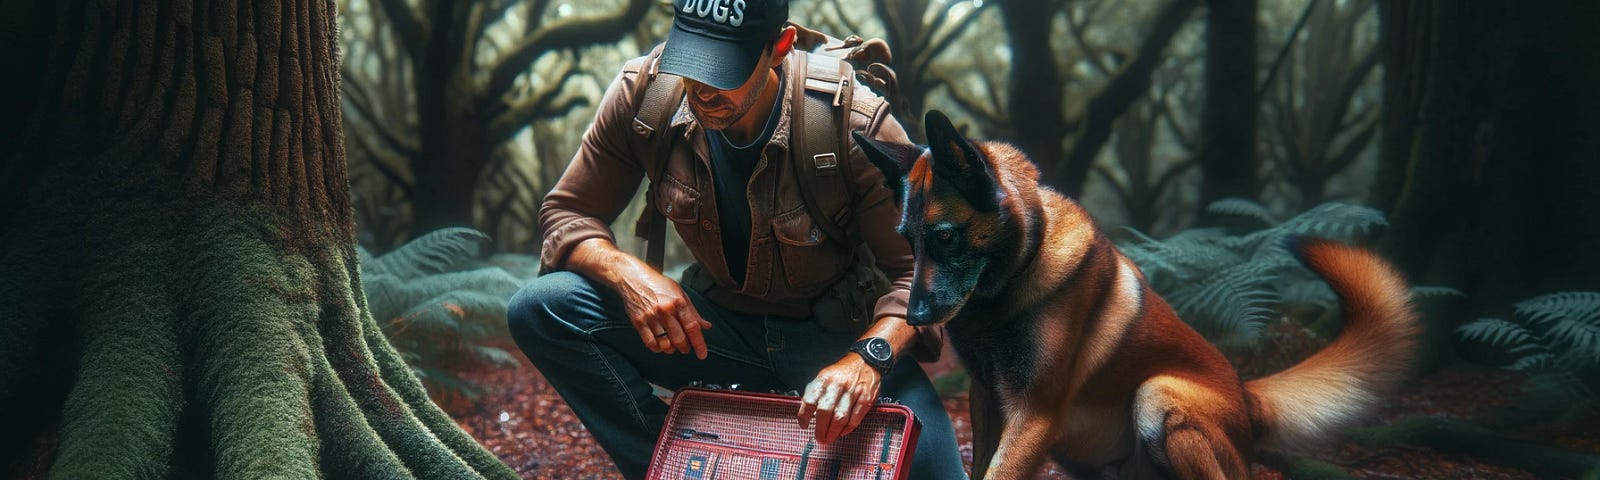 A man wearing a blue cap and his Malinois find a red suitcase under a tree.